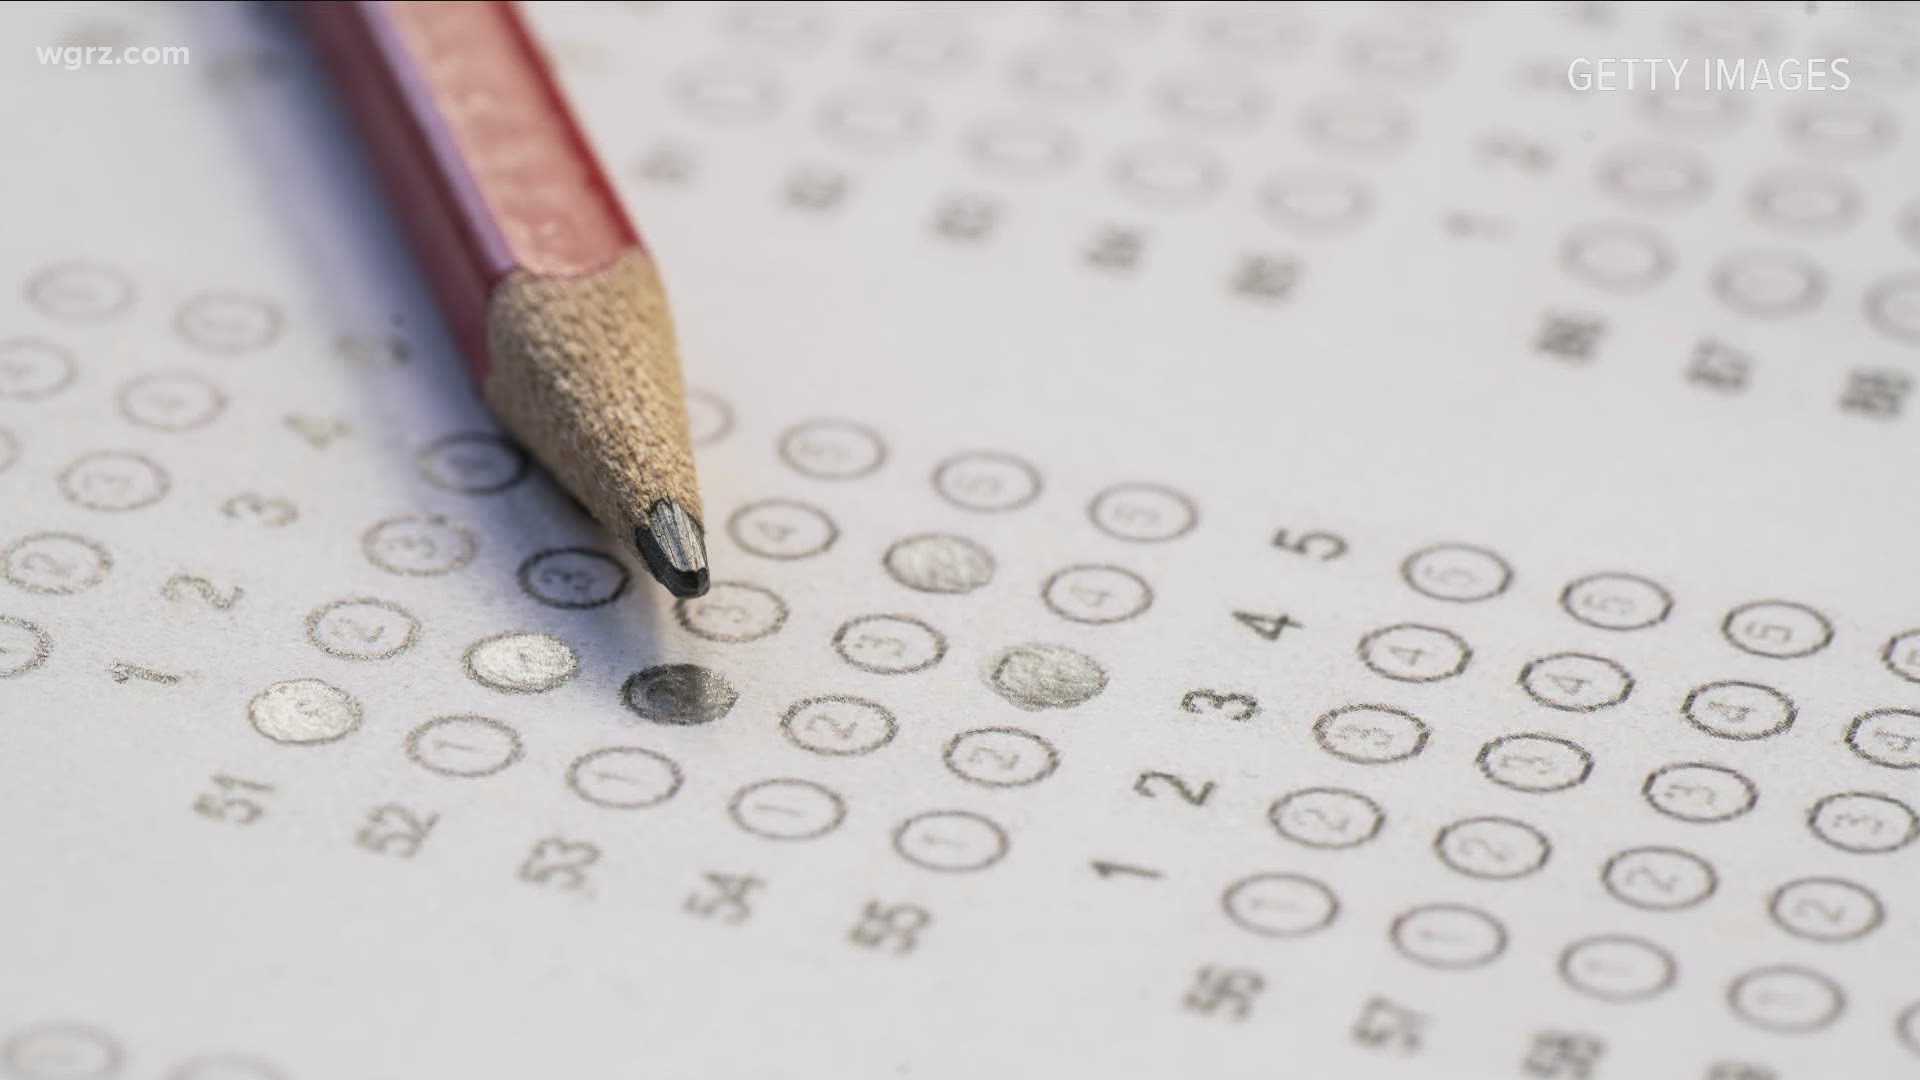 Several SAT test centers closed tomorrow